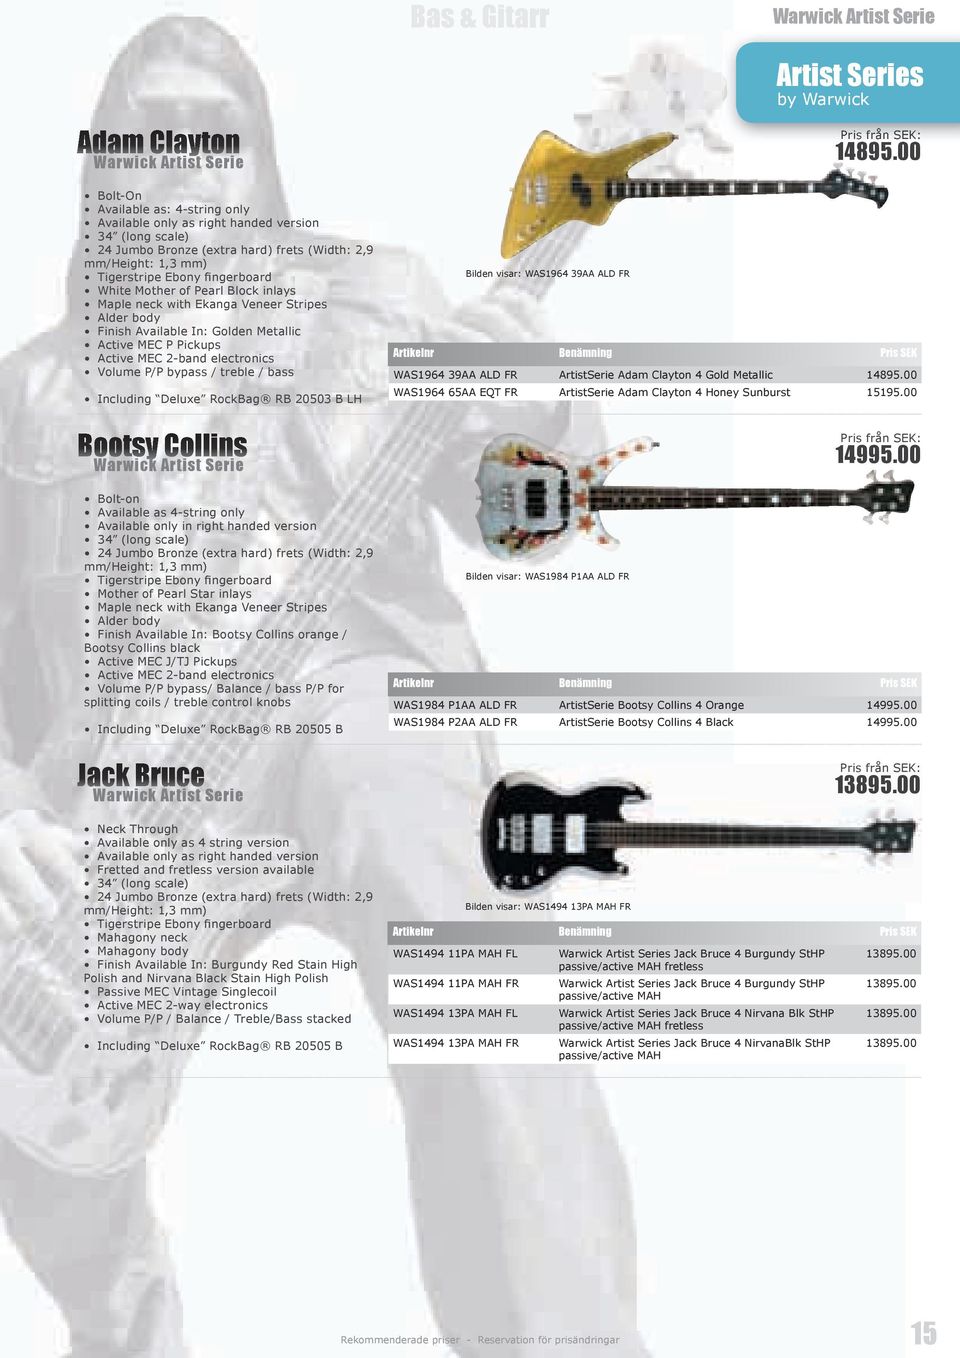 Pickups Active MEC 2-band electronics Volume P/P bypass / treble / bass Including Deluxe RockBag RB 20503 B LH Bootsy Collins Warwick Artist Serie Bolt-on Available as 4-string only Available only in